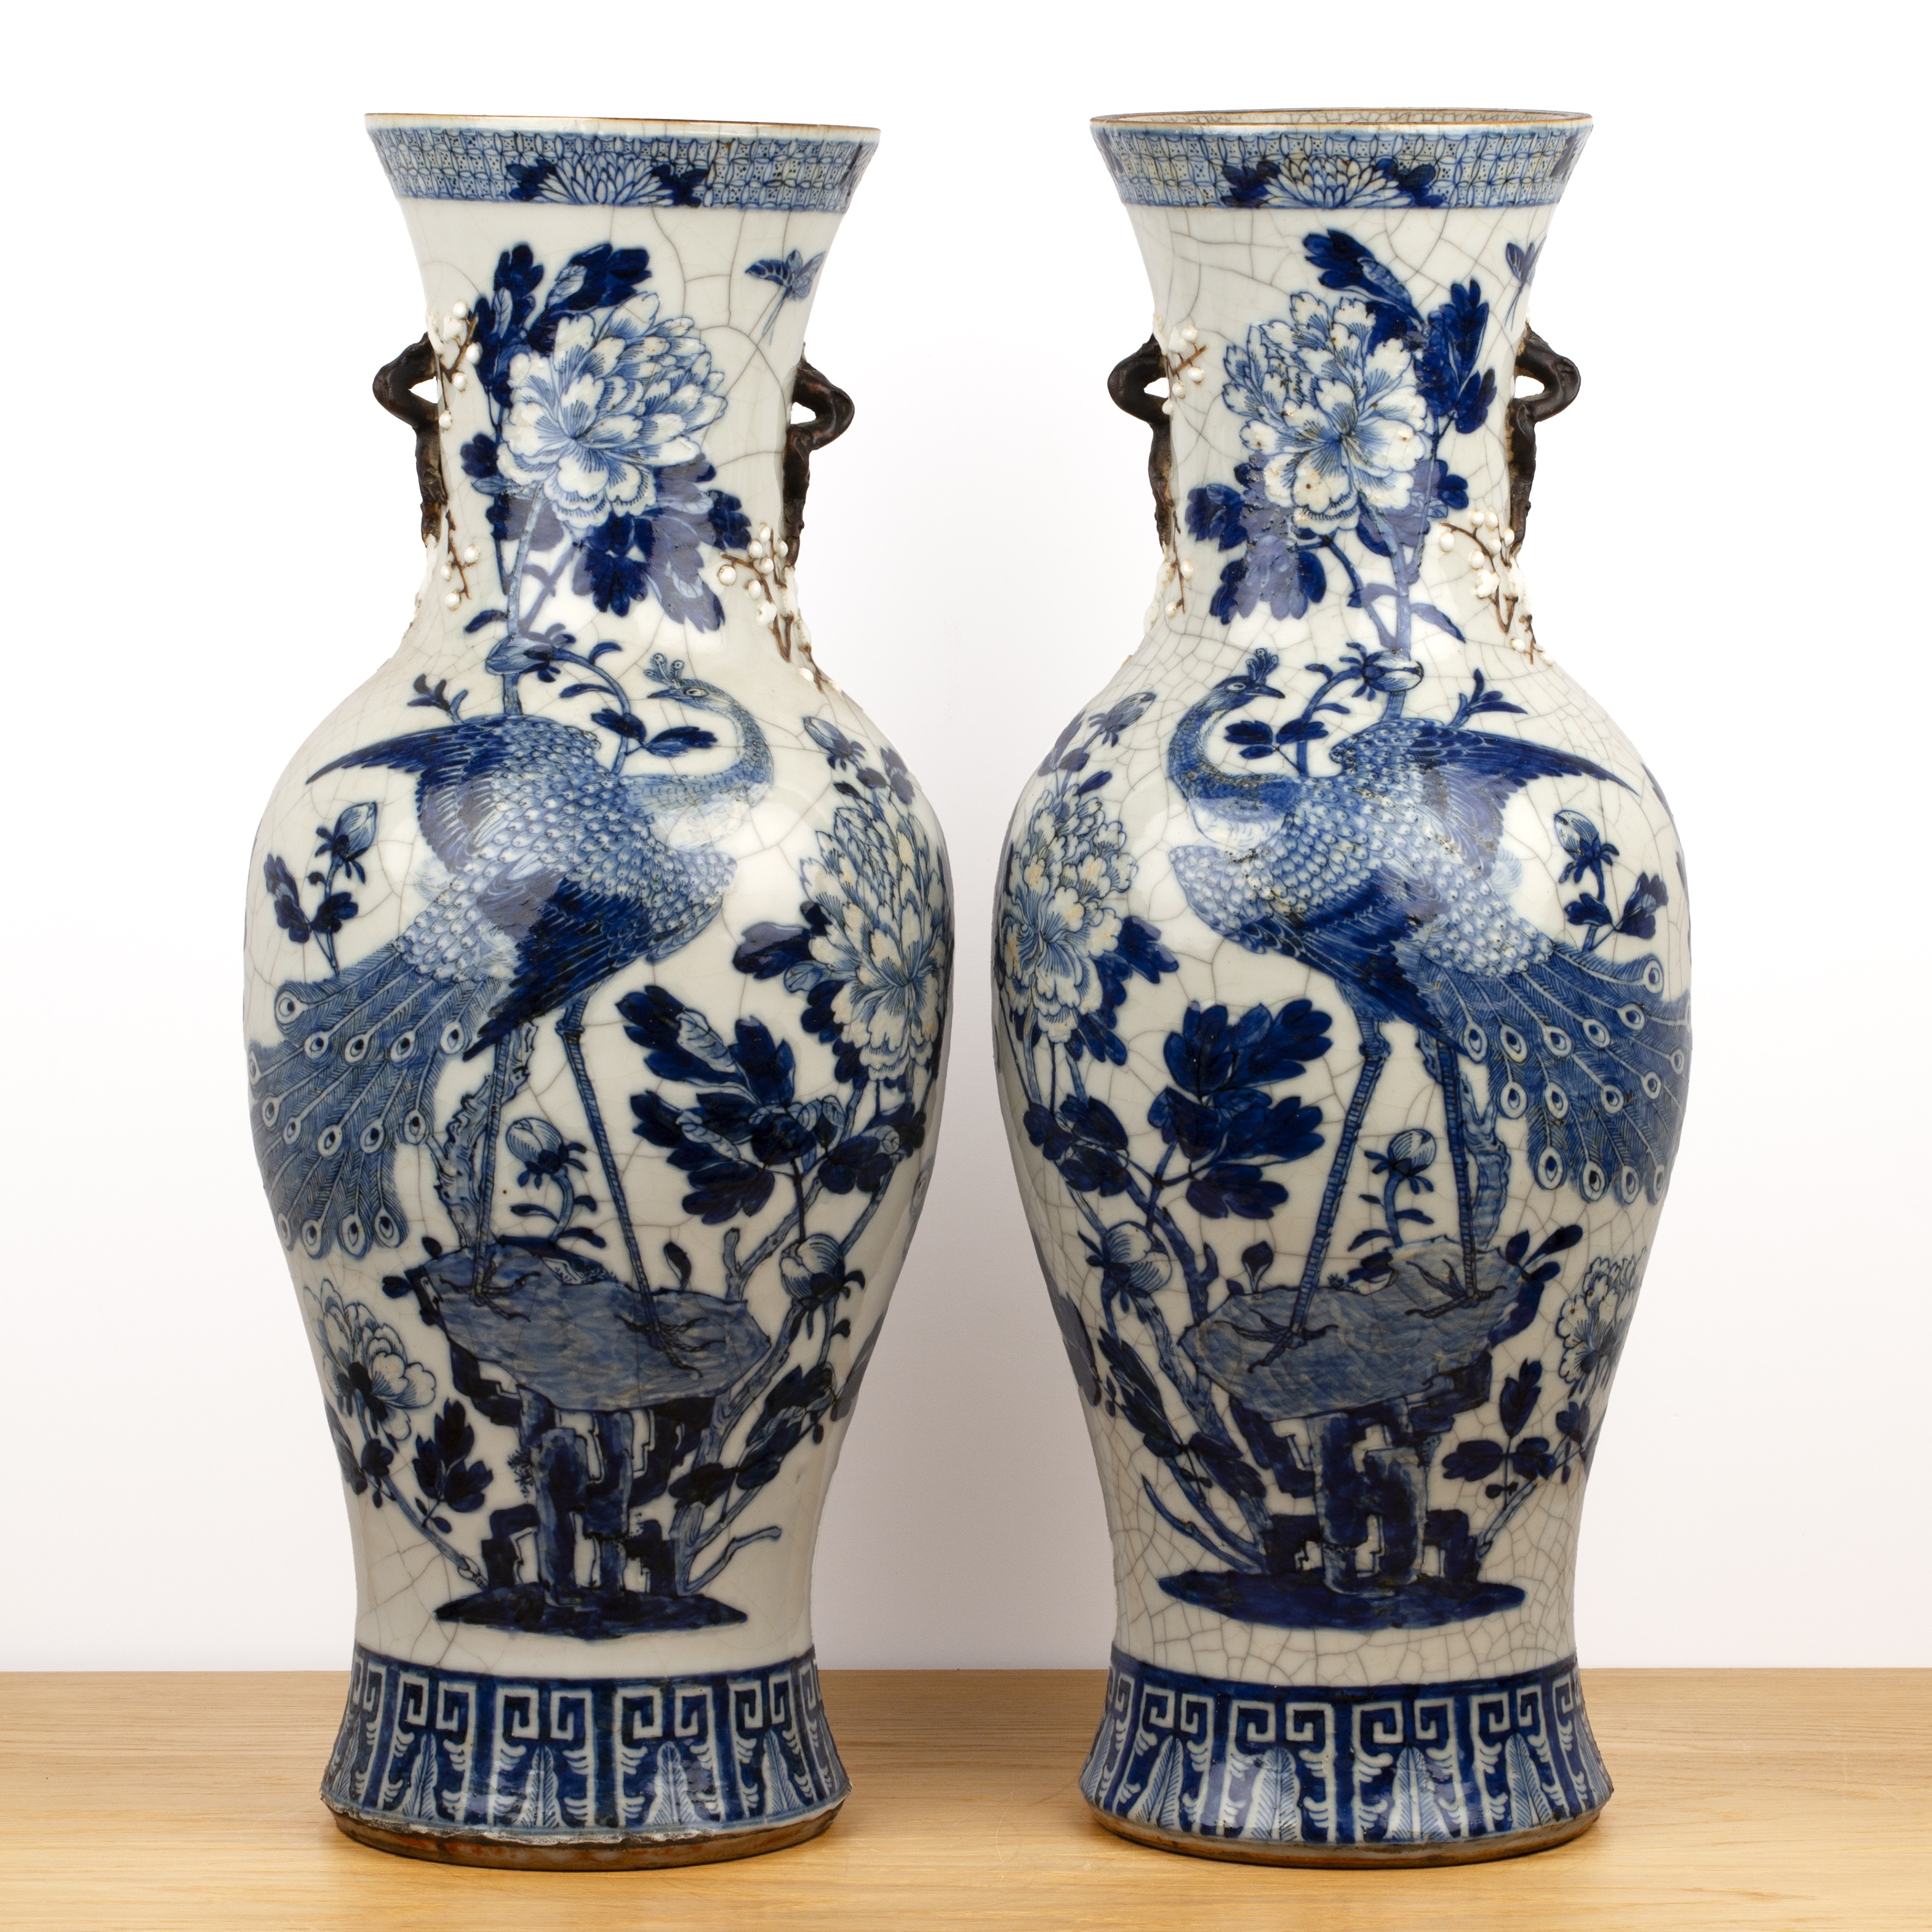 Pair of crackleware vases Chinese, 19th Century with phoenix and lotus decoration, raised bocage